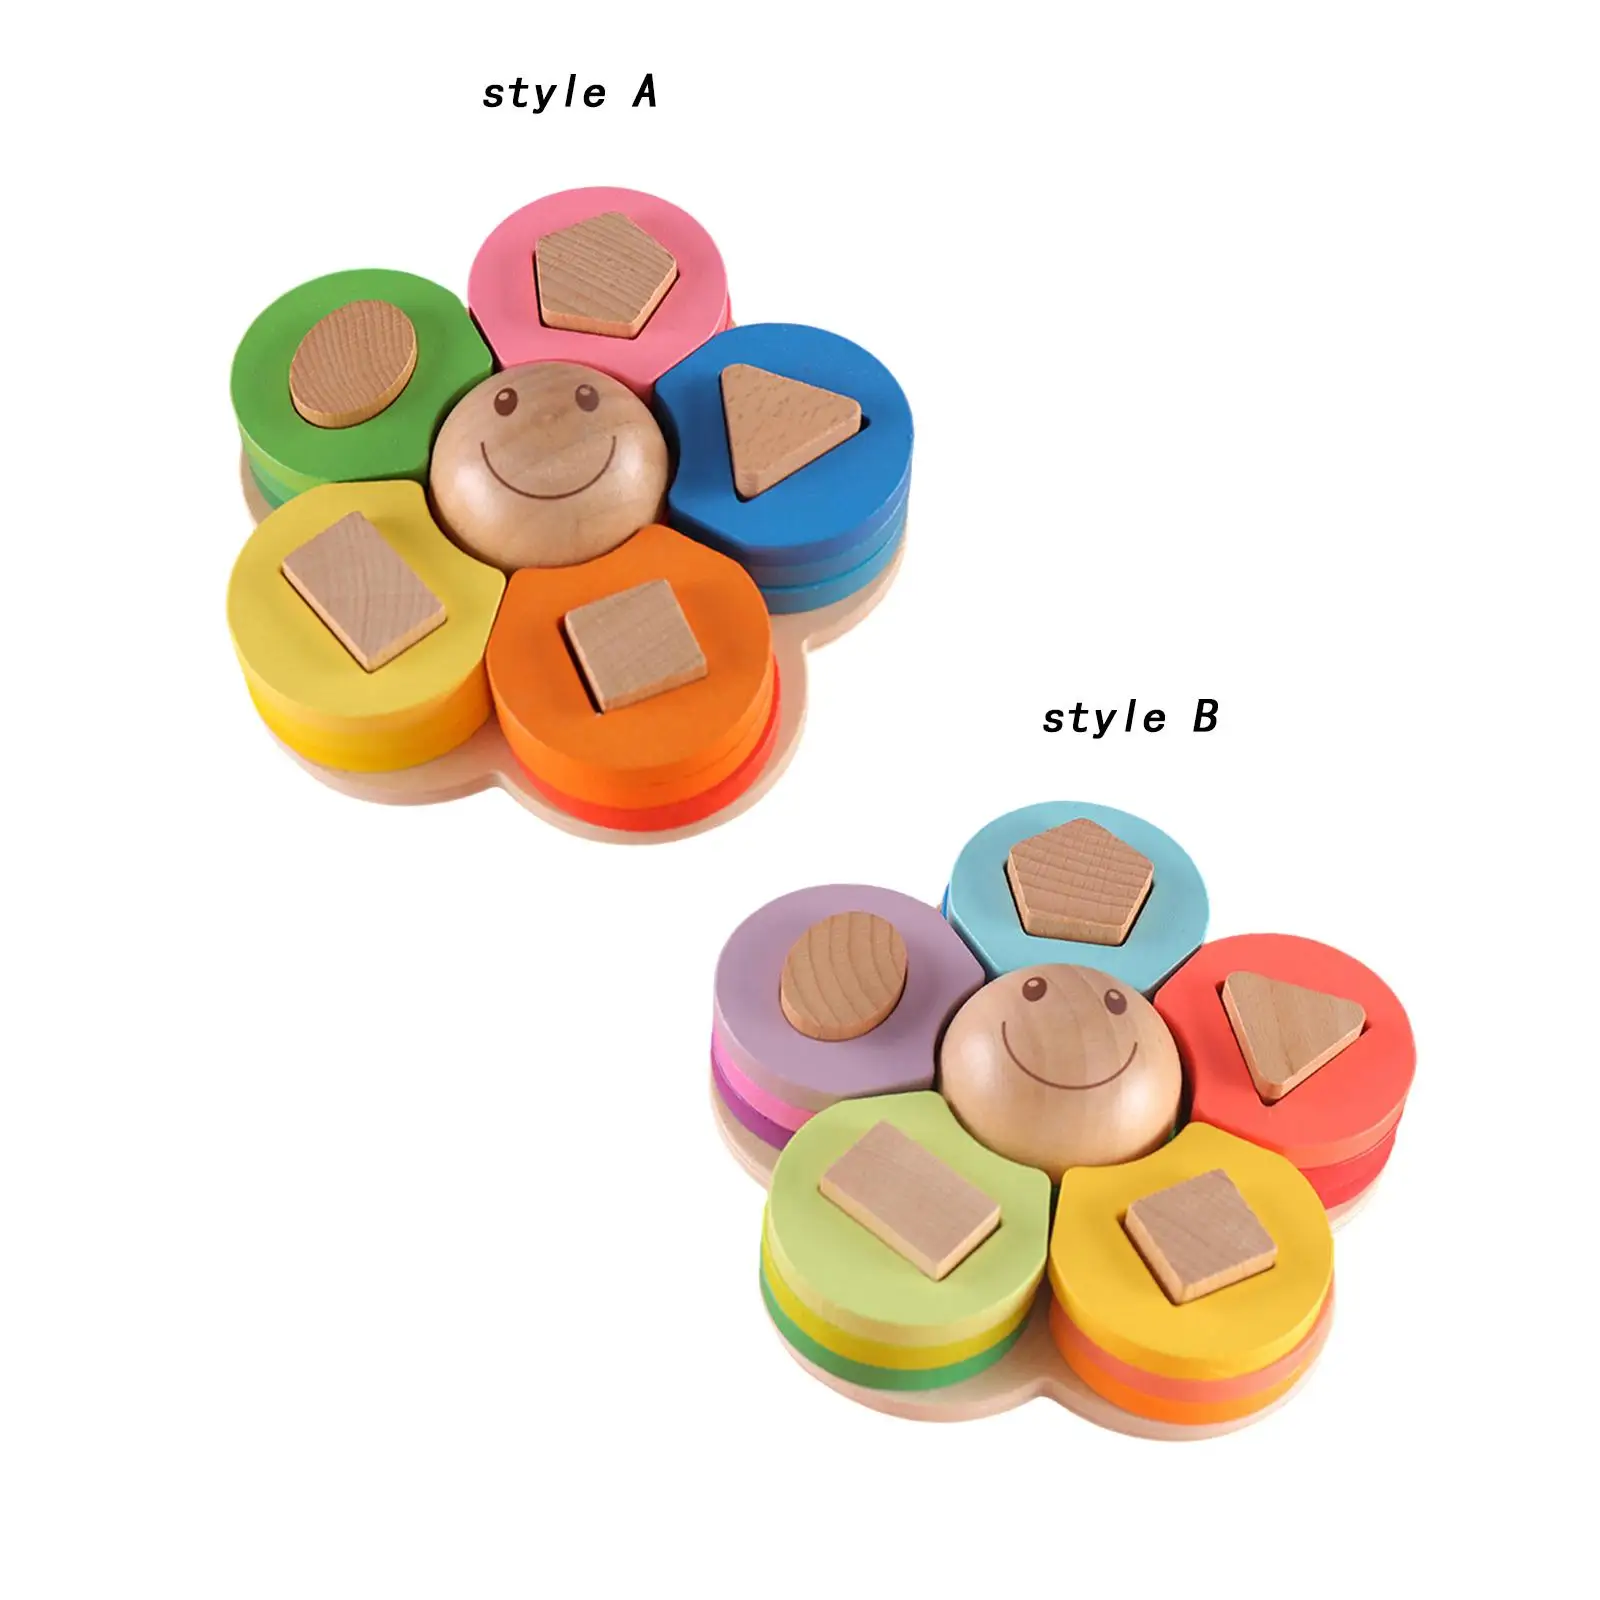 

Montessori Toy Wooden Sorting & Stacking Toy for Kids Children Holiday Gifts